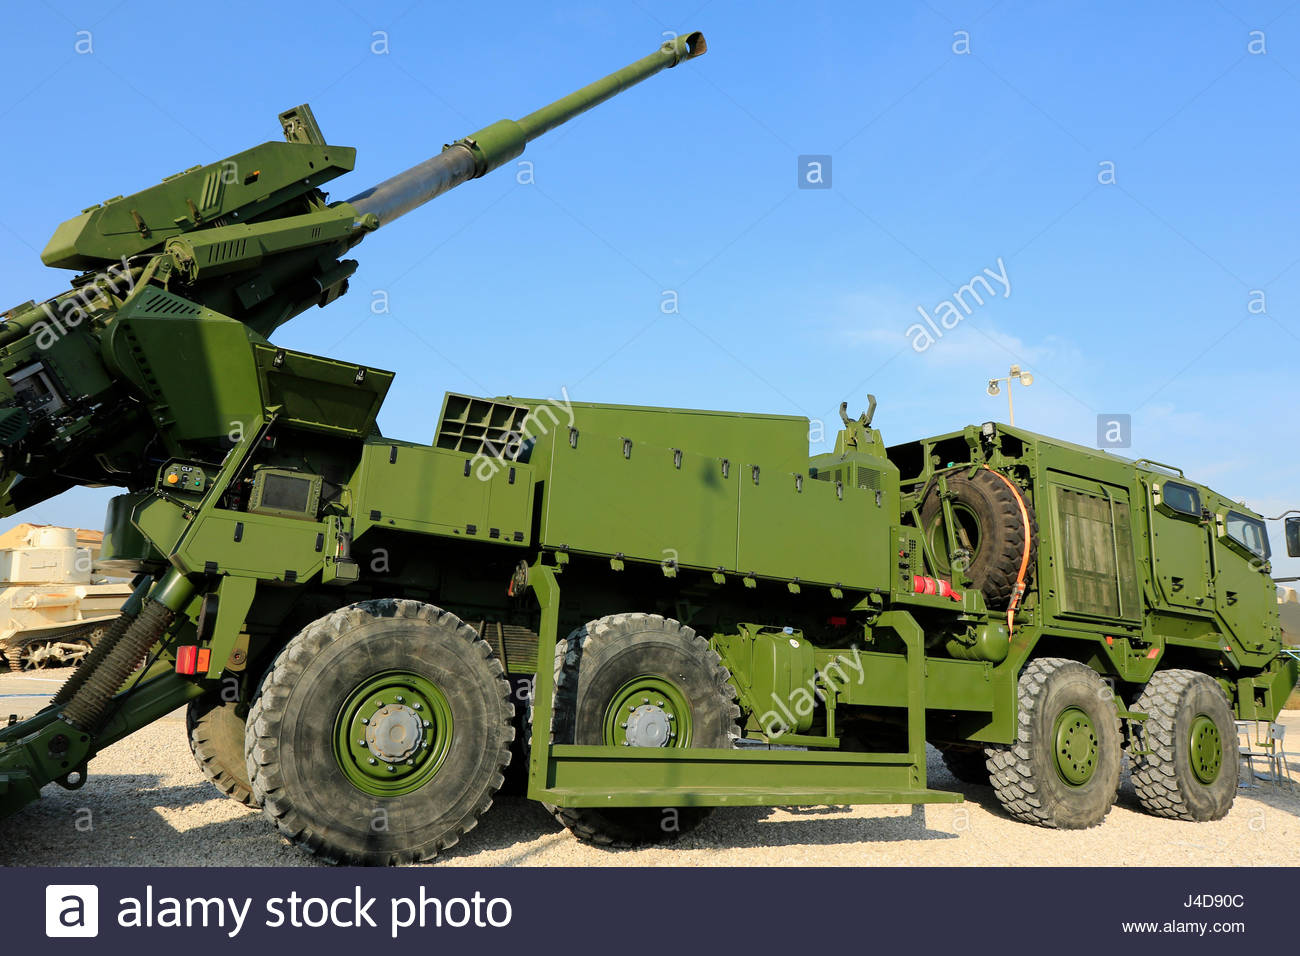 israel-elbit-systems-soltam-atmos-155mm-howitzer-at-the-armored-corps-J4D90C.jpg